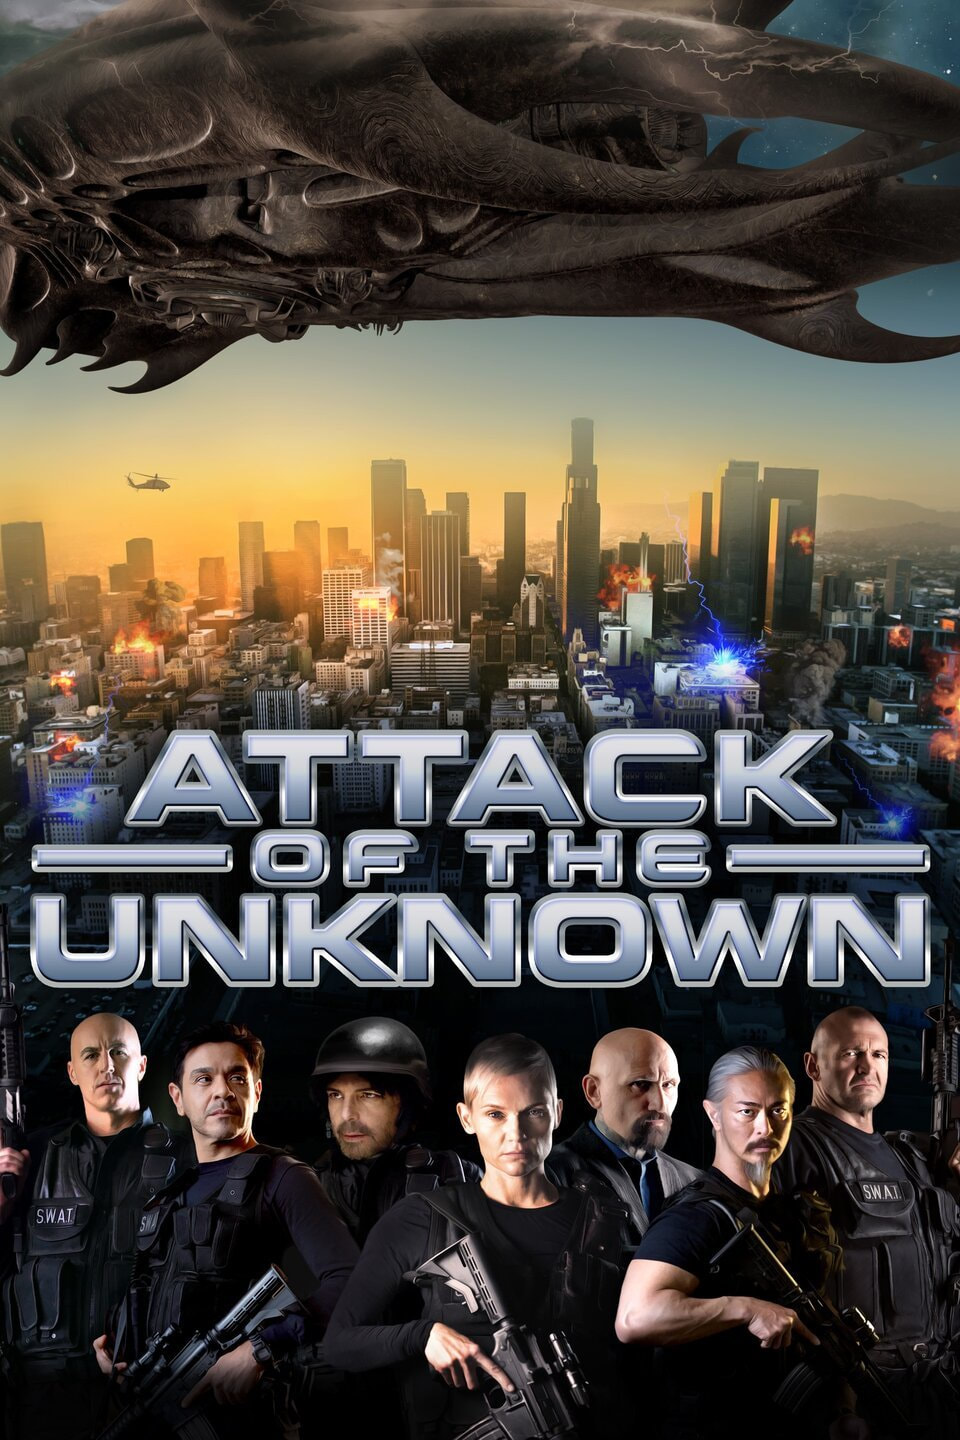 Attack of the unknown poster.